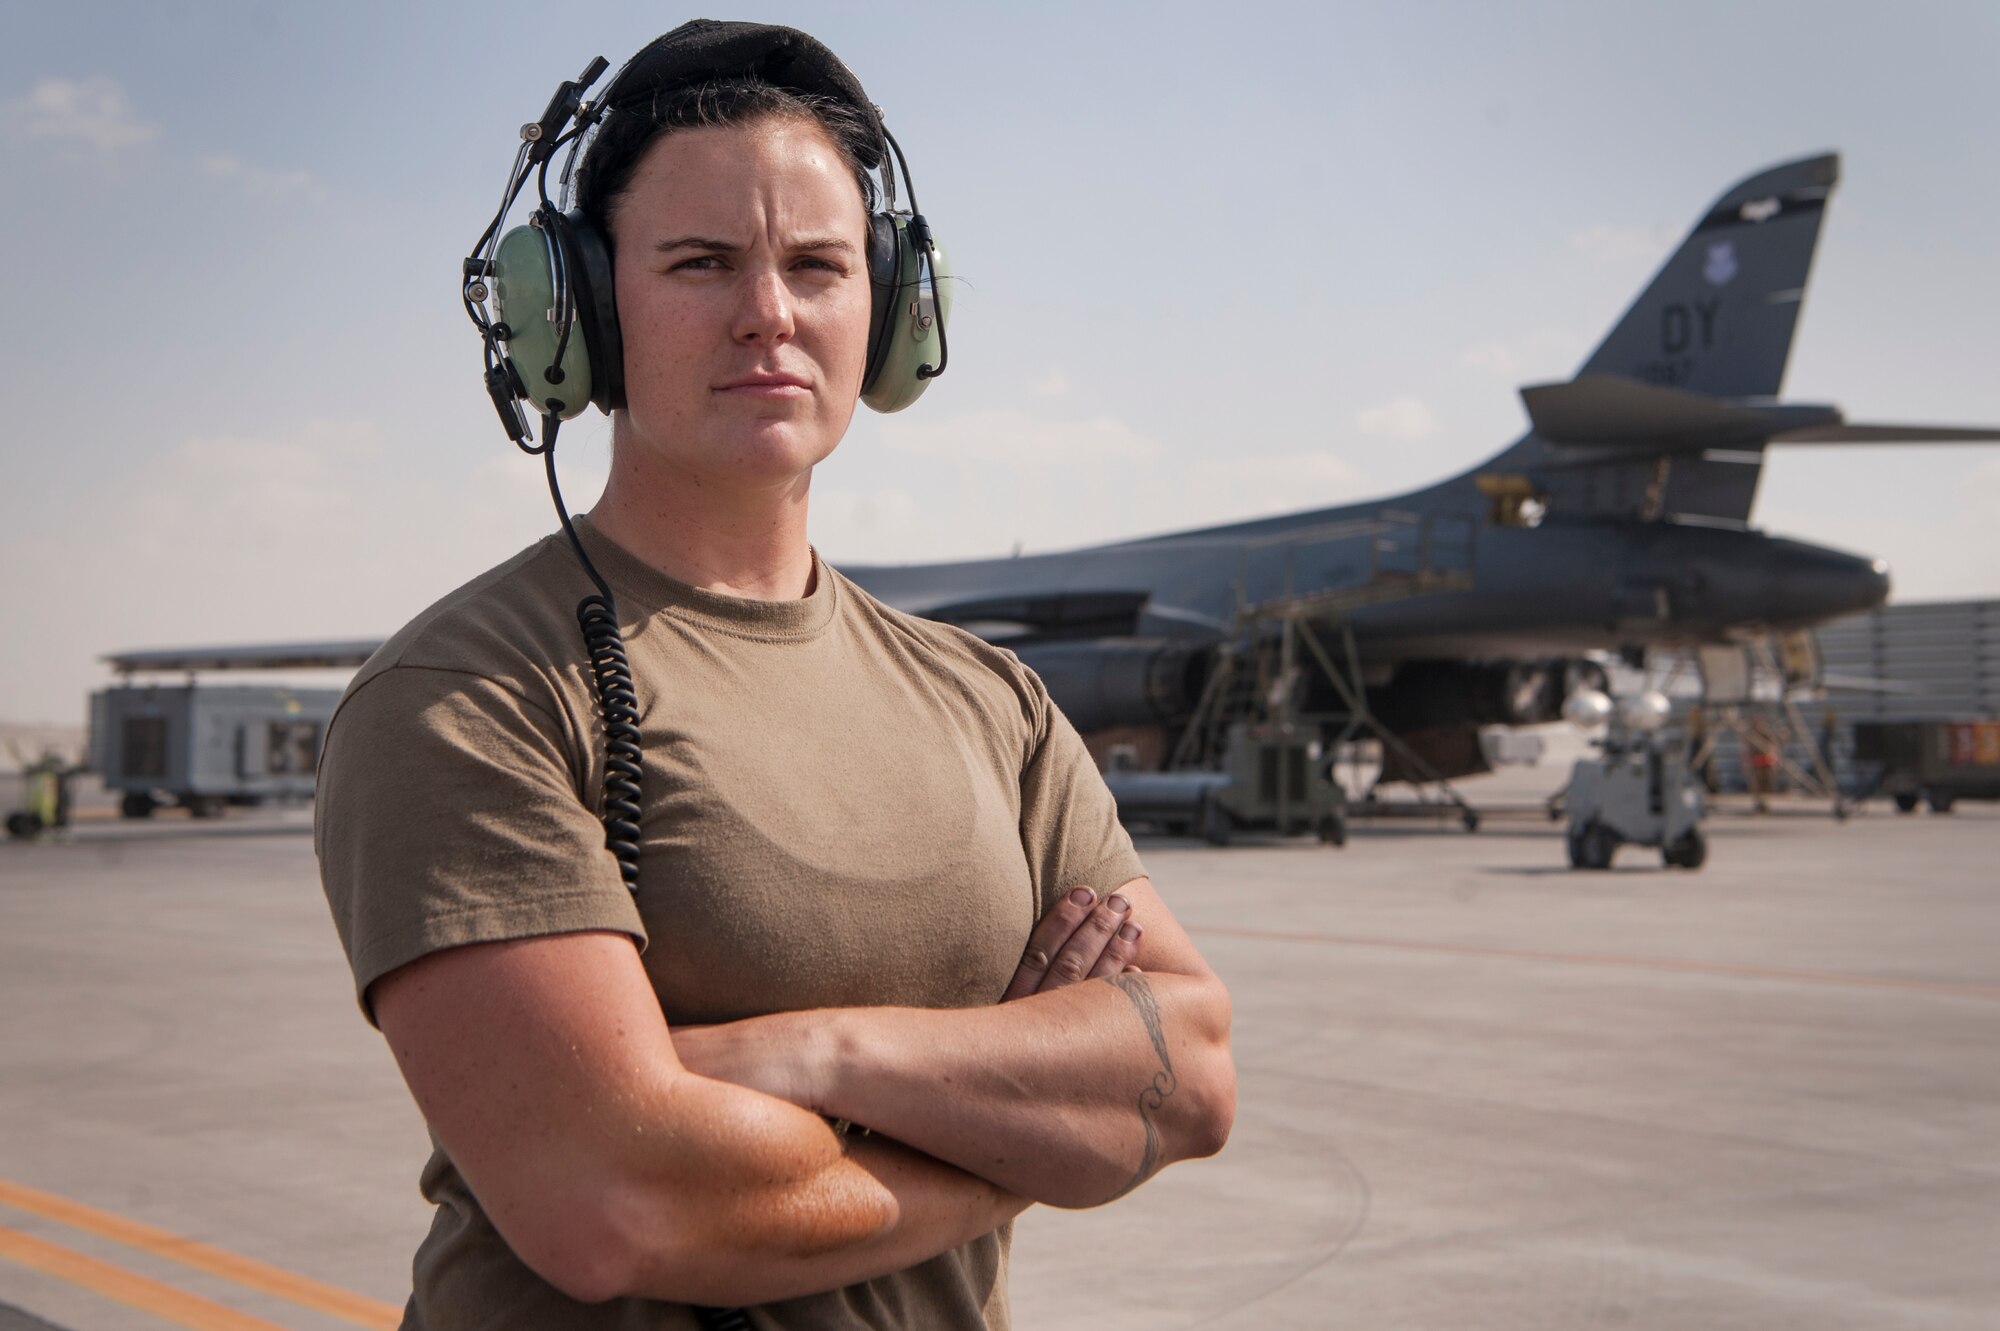 Airman 1st Class Shelby Ries, 379th Expeditionary Aircraft Maintenance Squadron (EAMXS) B-1B Lancer propulsion apprentice, stands in front of a B-1B Lancer Dec. 22, 2018, at Al Udeid Air Base, Qatar. Due to Ries’s exceptional performance she was selected to deploy to Al Udeid as an area of responsibility (AOR) advanced echelon (ADVON) team member. Ries led two engine changes and more than 90 maintenance actions which resulted in 56 B-1B sorties, totaling 672 flying hours. (U.S. Air Force photo by Tech. Sgt. Christopher Hubenthal)